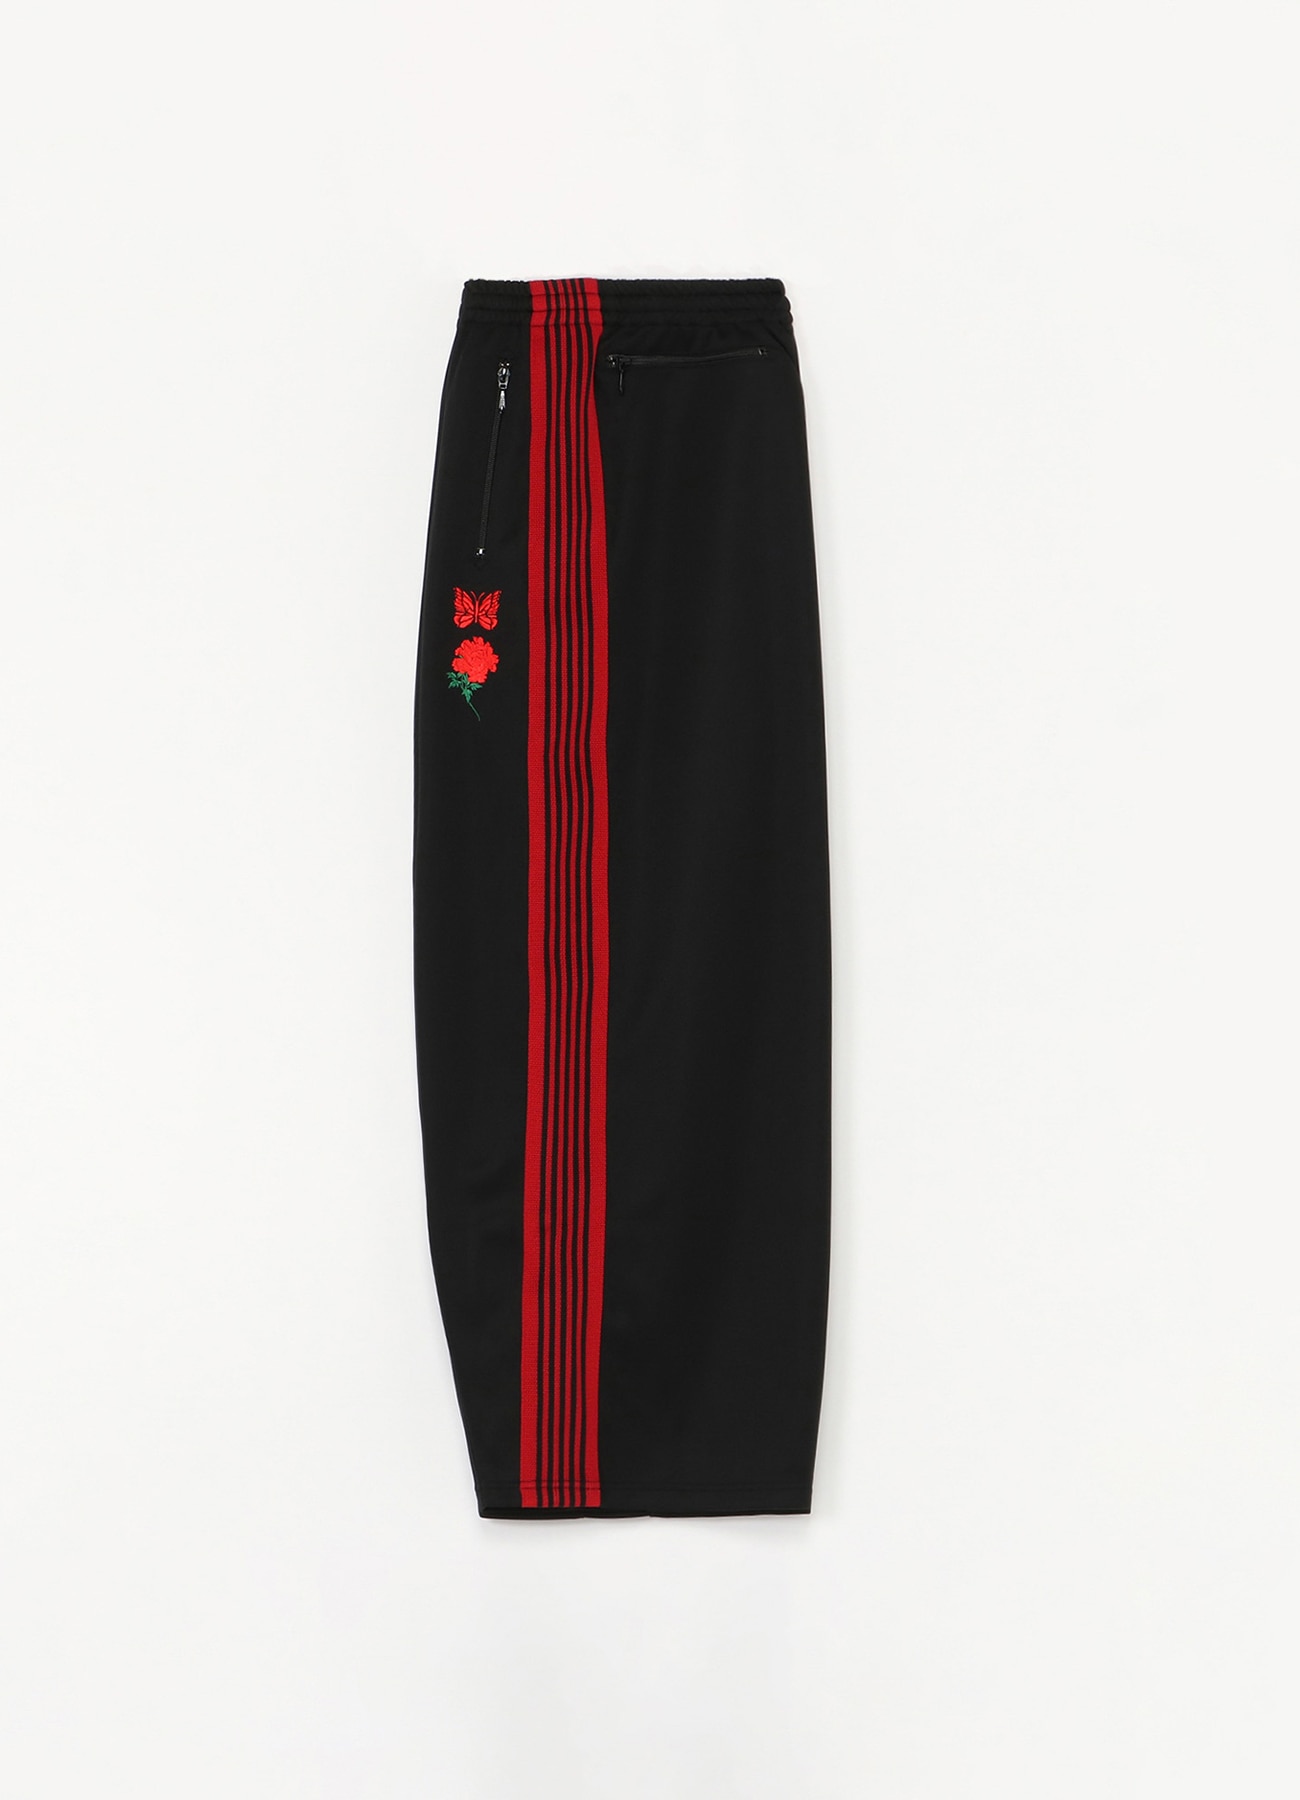 WILDSIDE x NEEDLES HD Track Pant (XS REDxBLACK): NEPENTHES